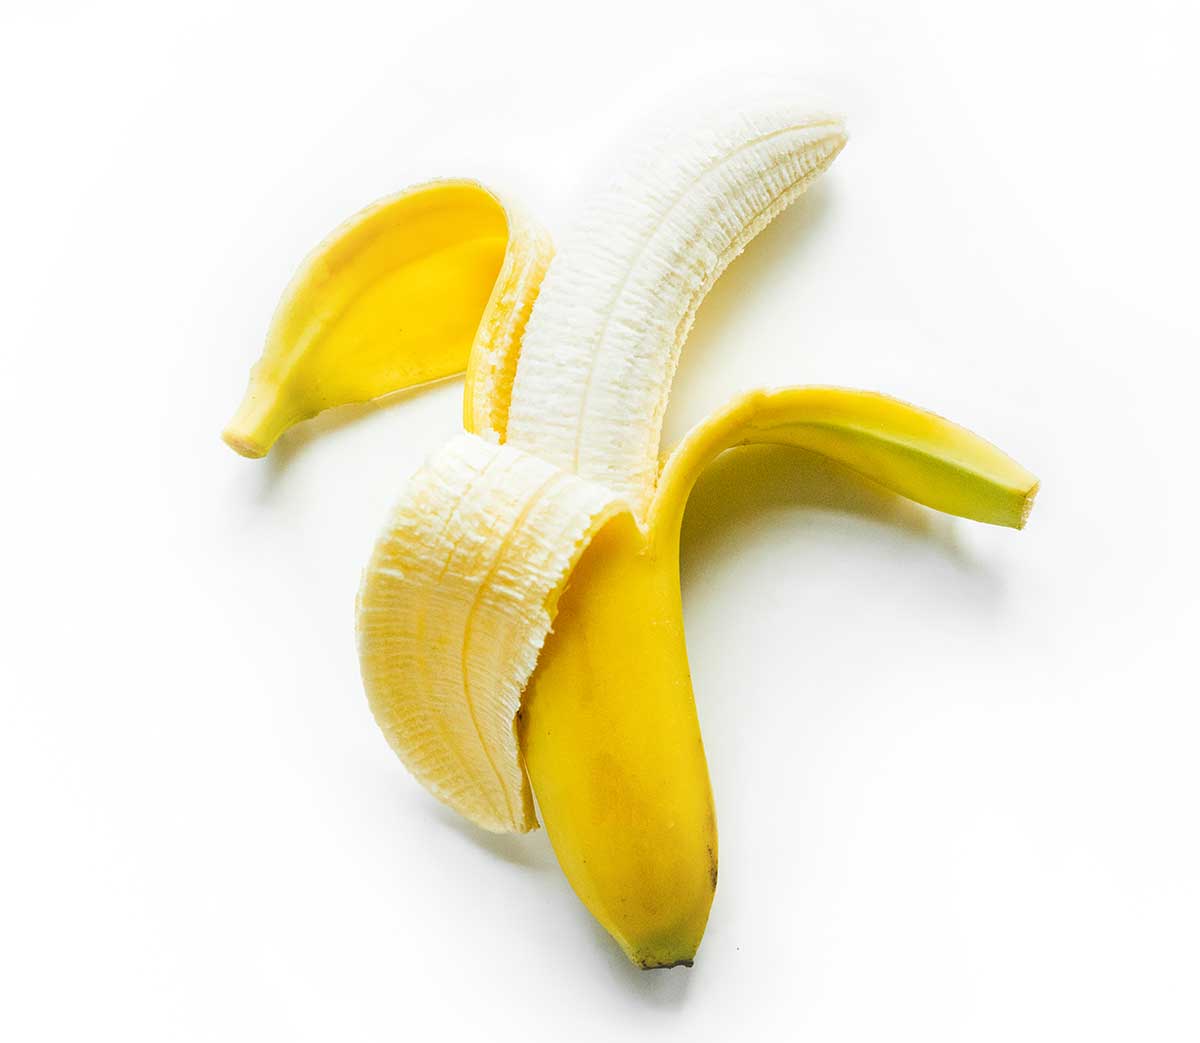 A banana being peeled open on a white background.